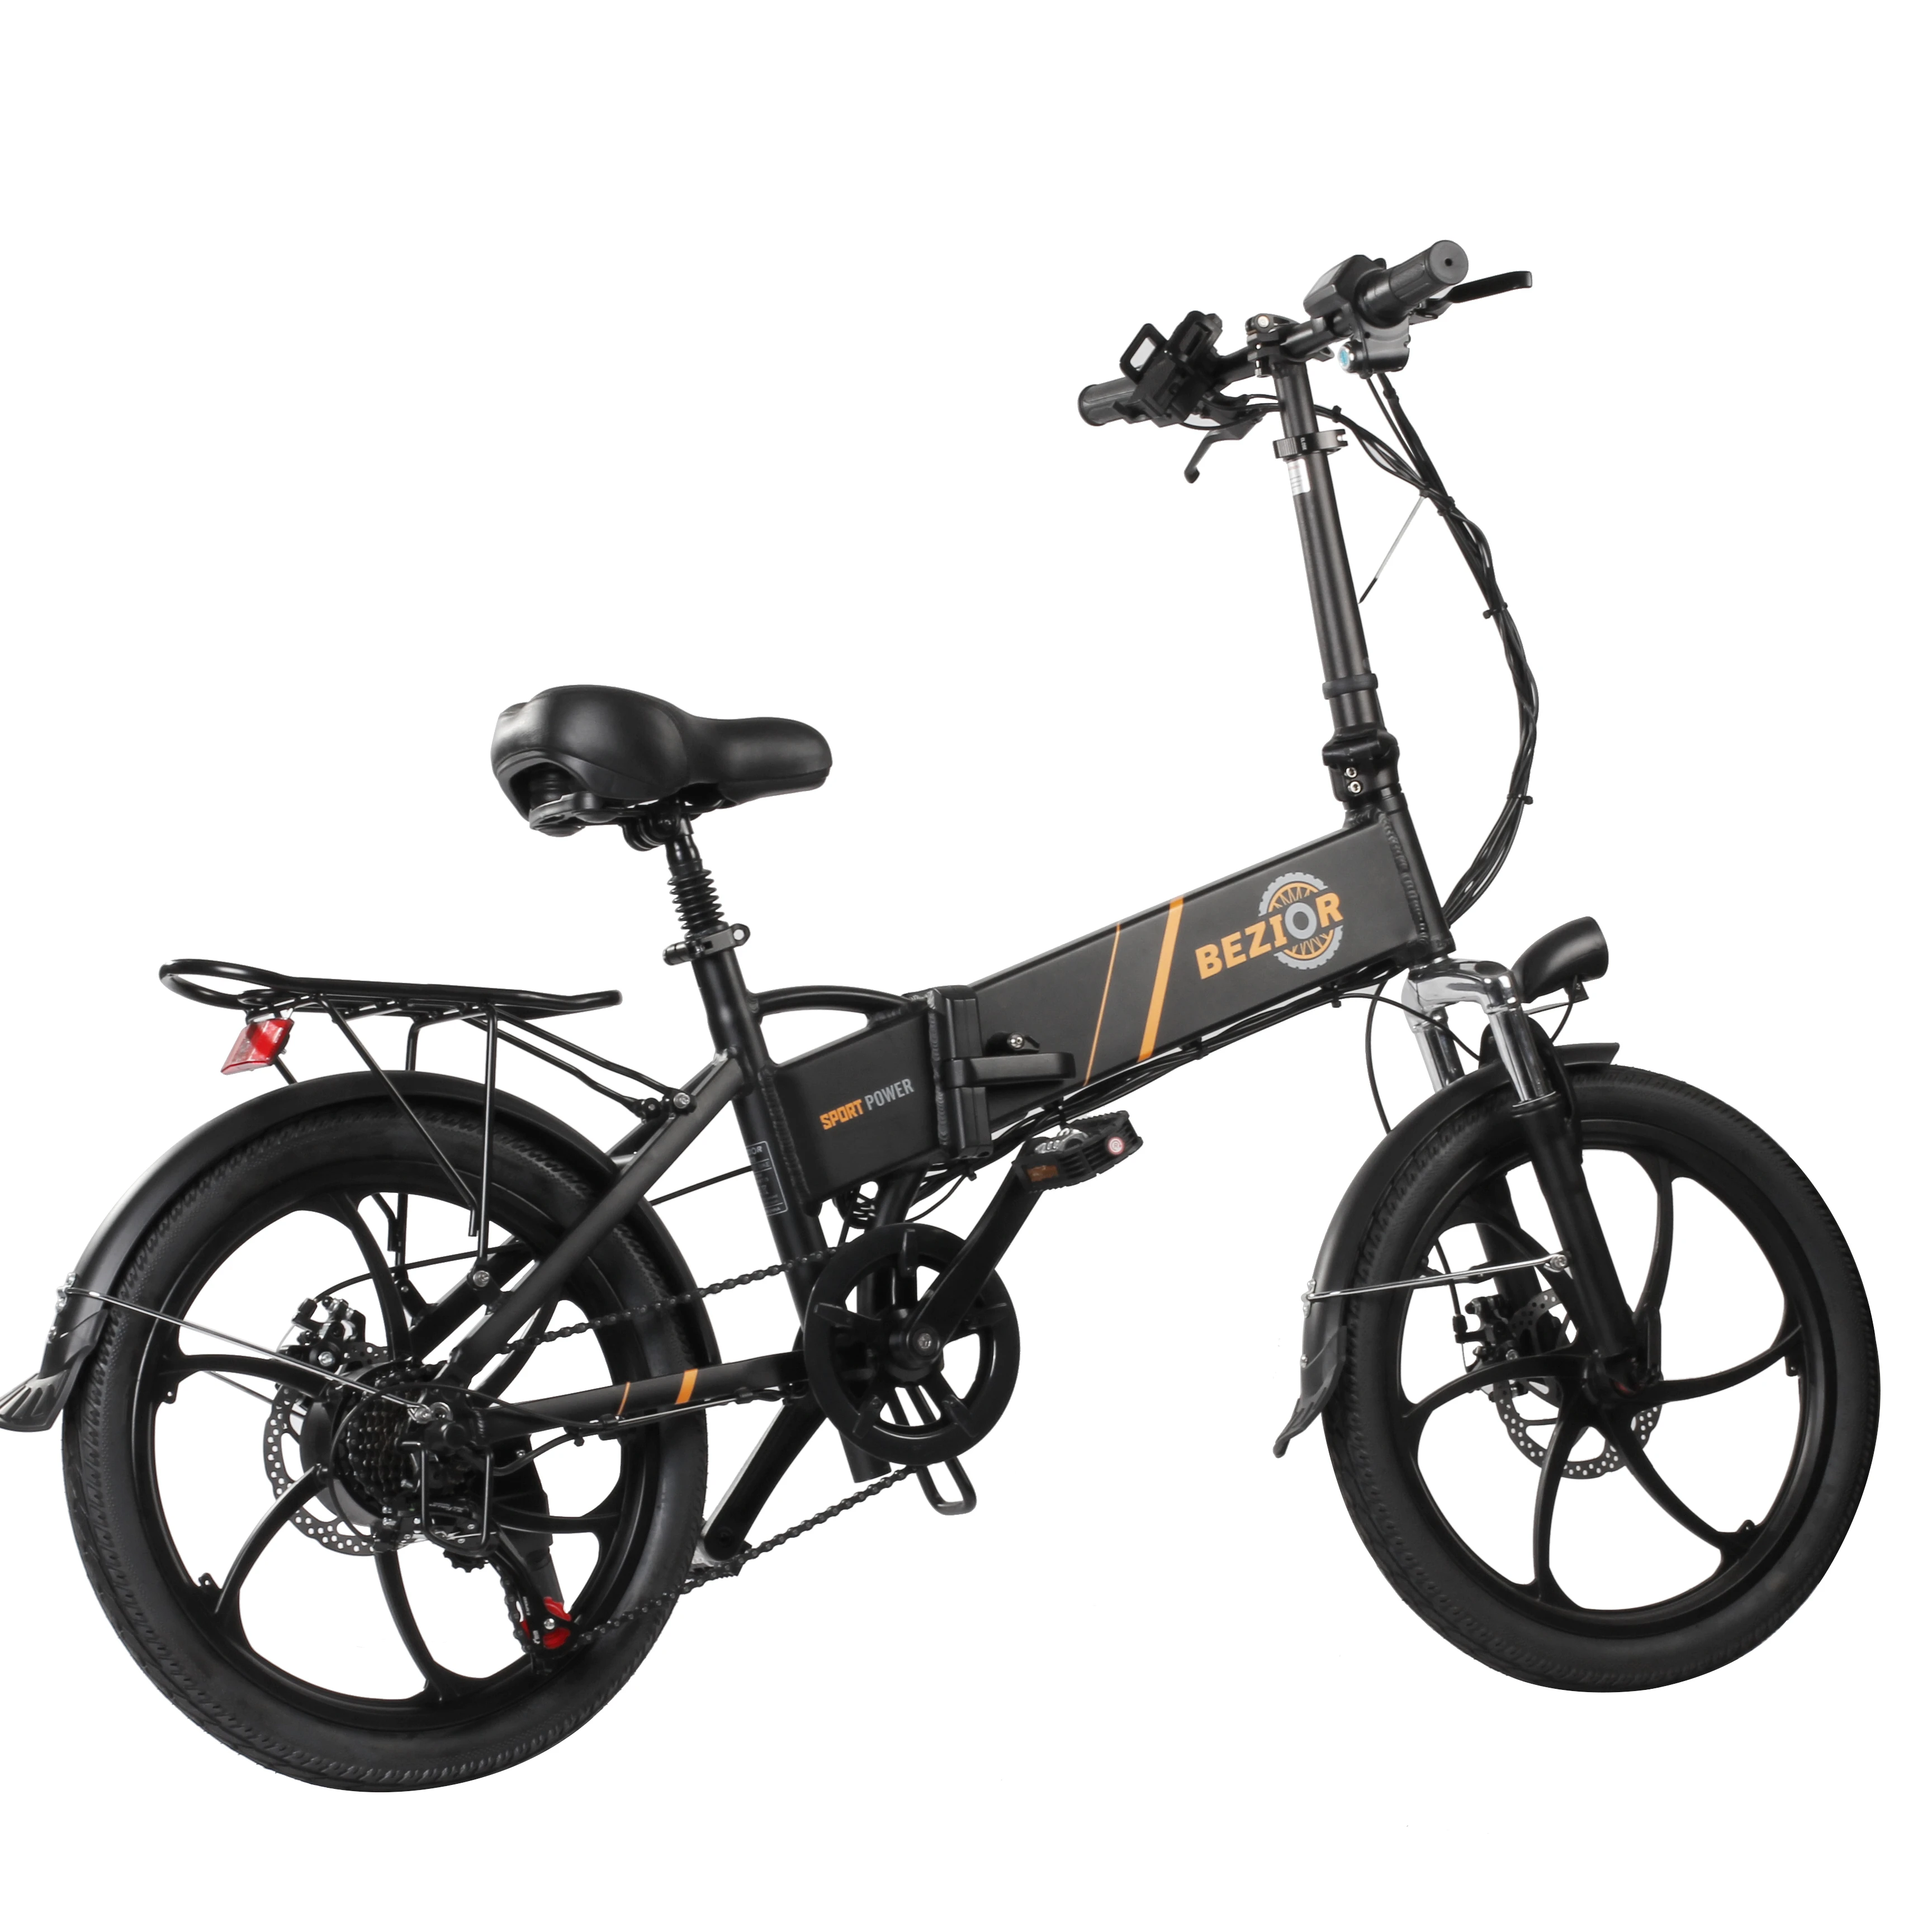 

Bezior M20 20 inch Folding Electric Bicycle 350W 48V Motor 10.4ah Battery EU in stock Dropshipping 7 Speed Moped Electric bike